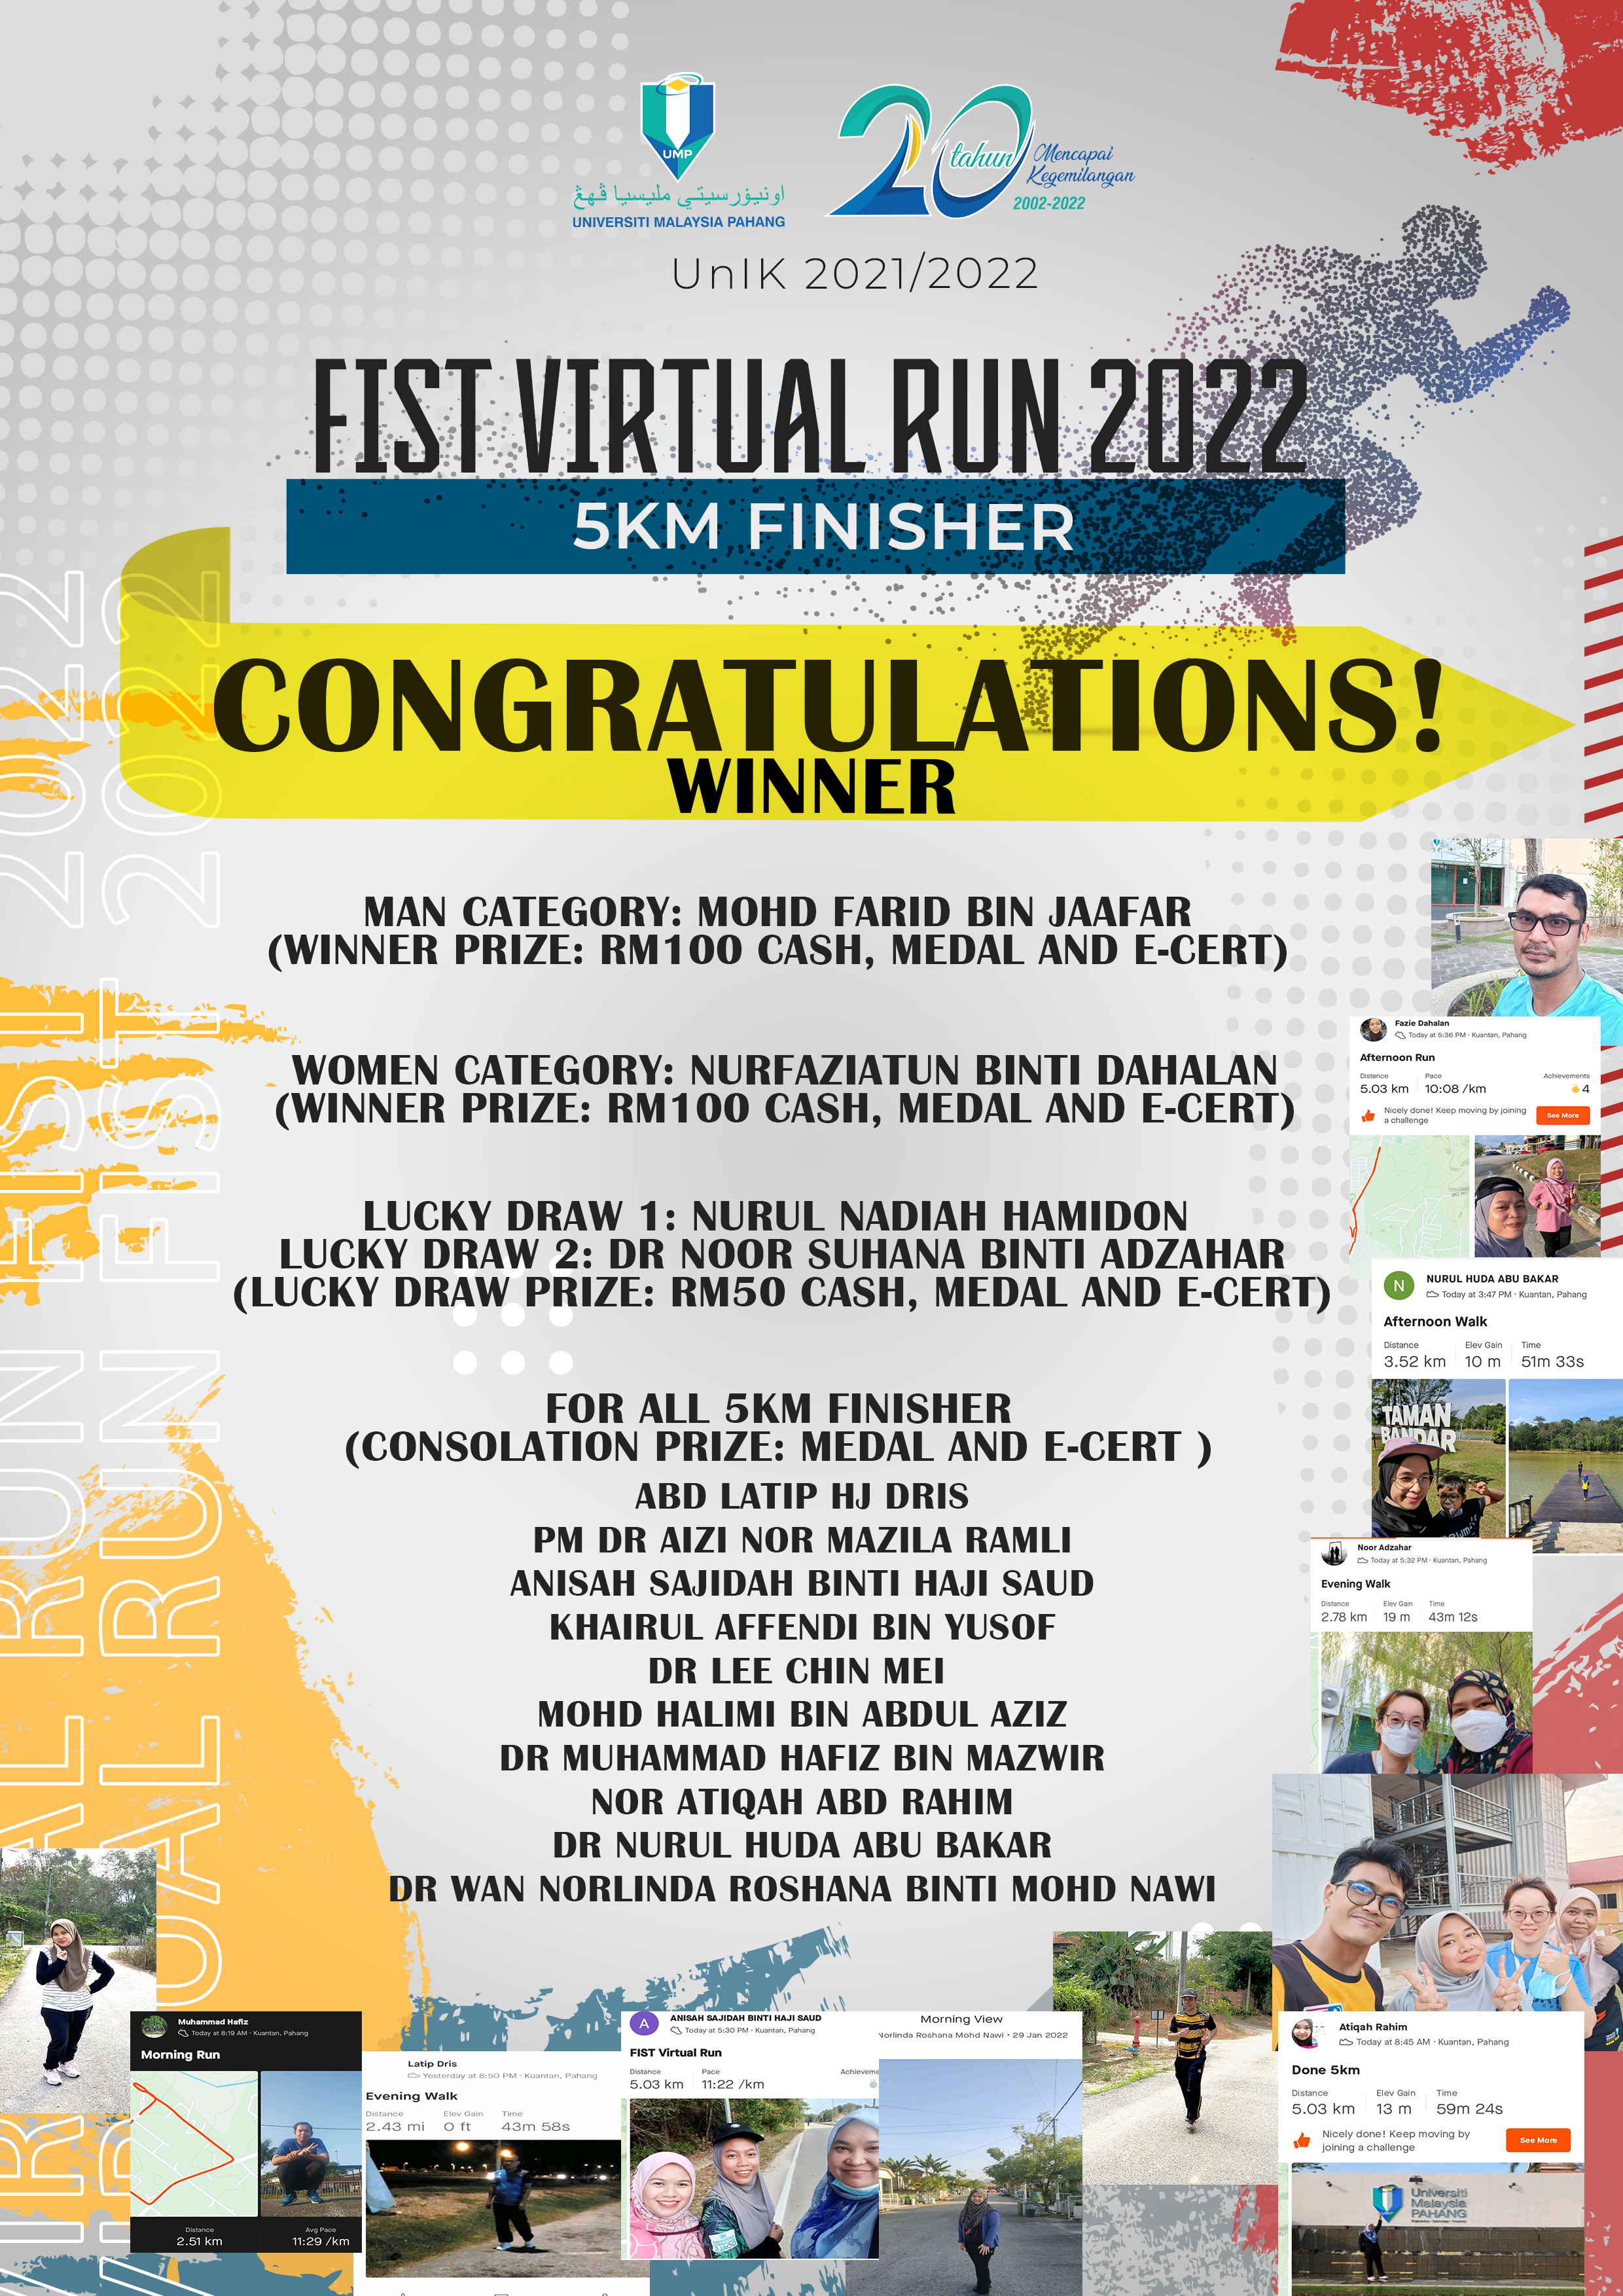 Congratulations to all FIST Virtual Run 2022 winners and all 5KM Finishers! 